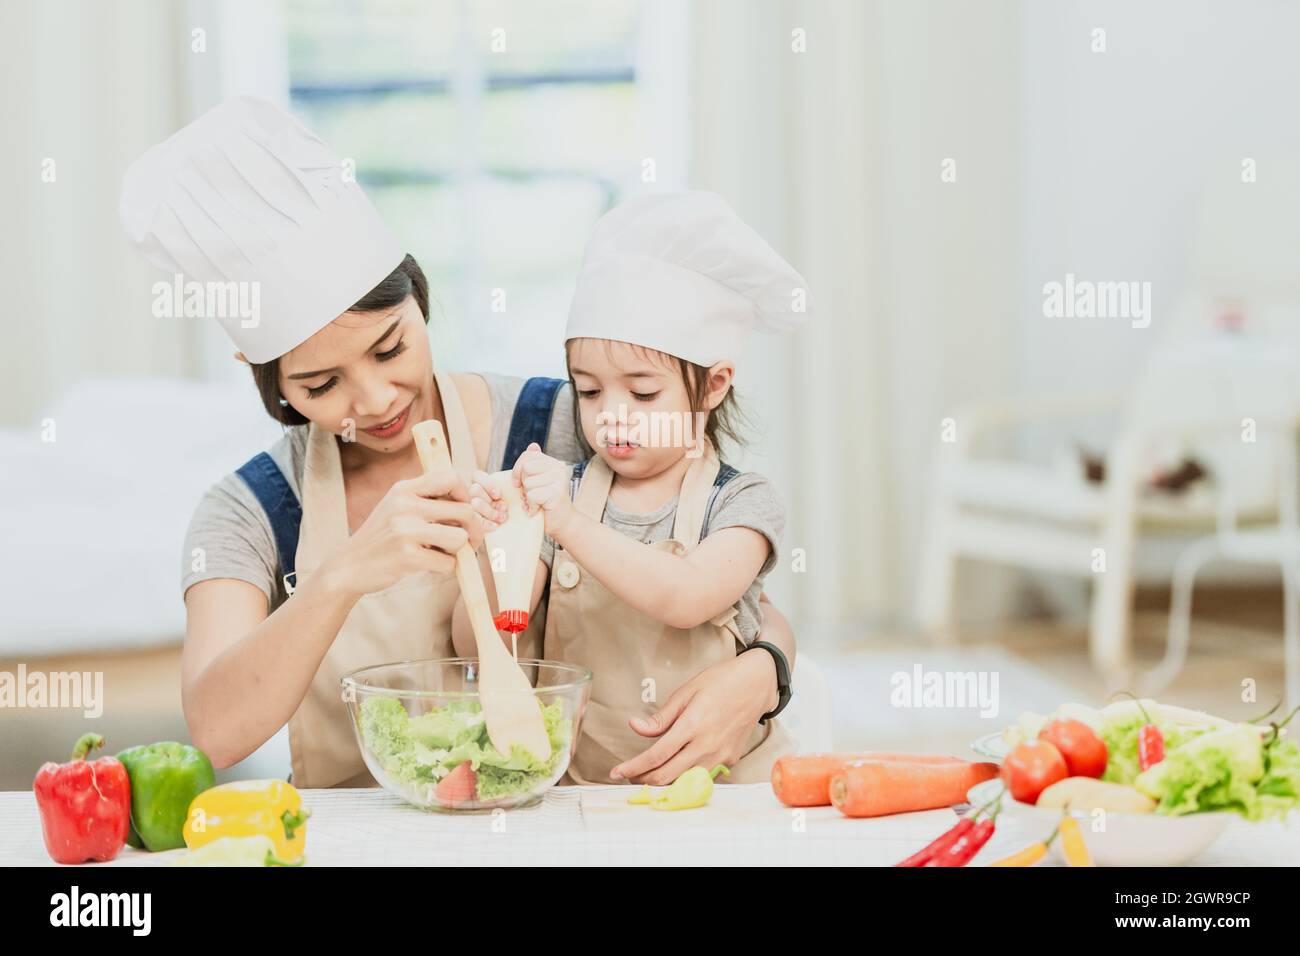 Happy Family Mom Teaching Cute Girl Preparing And Cooking Healthy Salad For The First Time. Stock Photo